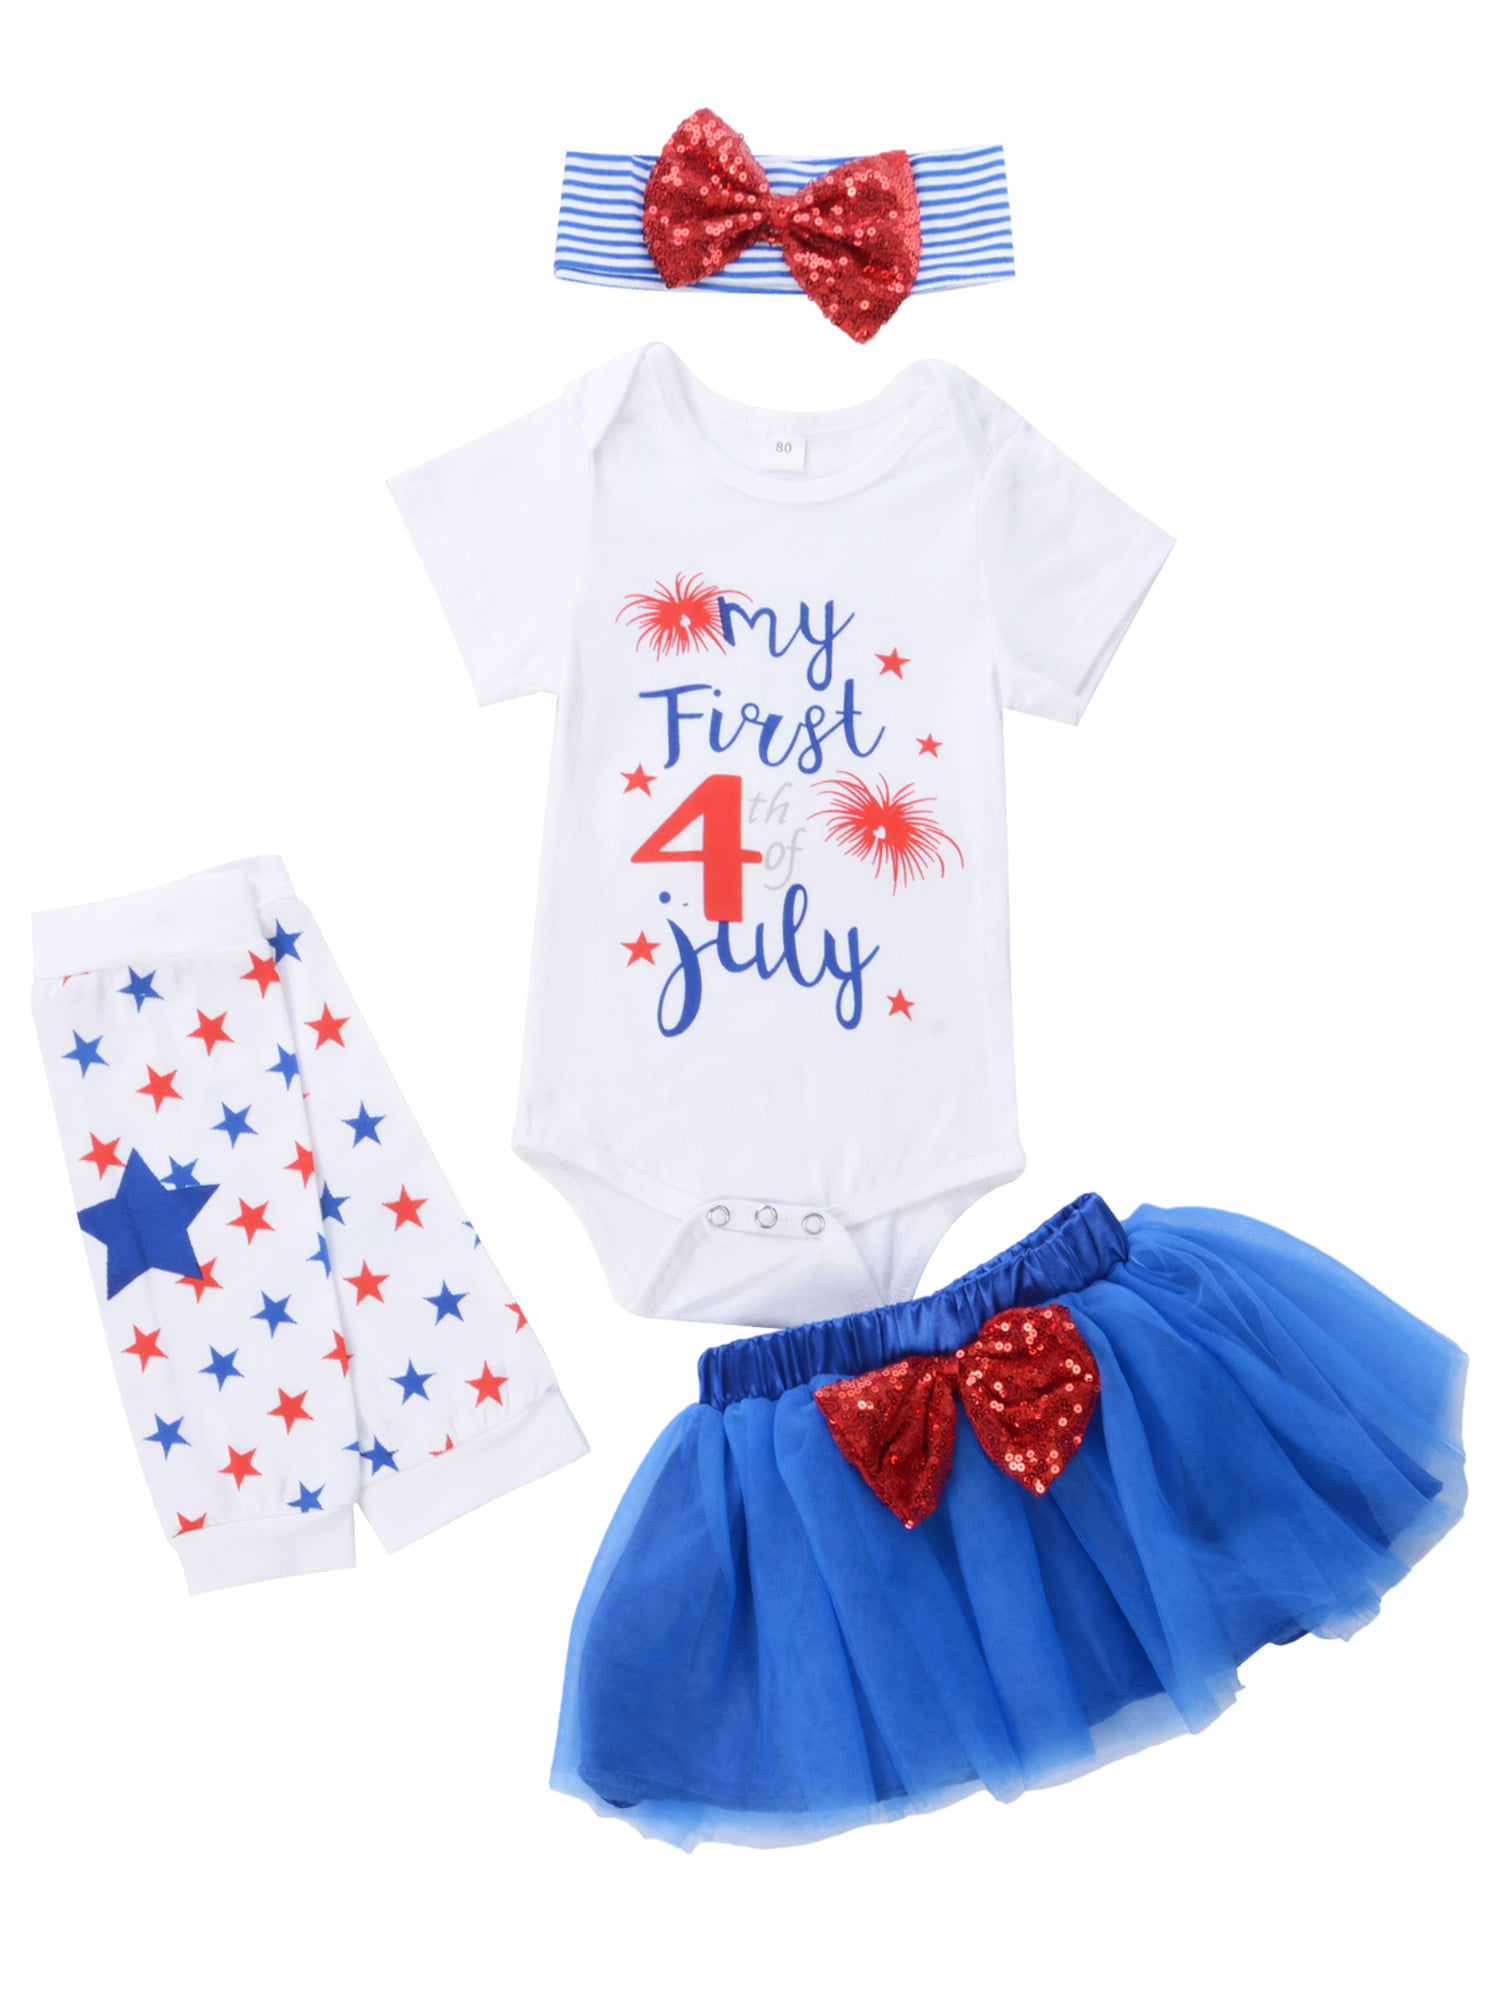 Baby Girl My First July 4th Skirt Outfits Toddler Girl Ruffle Romper Star Shorts Headband 3Pcs Clothes 